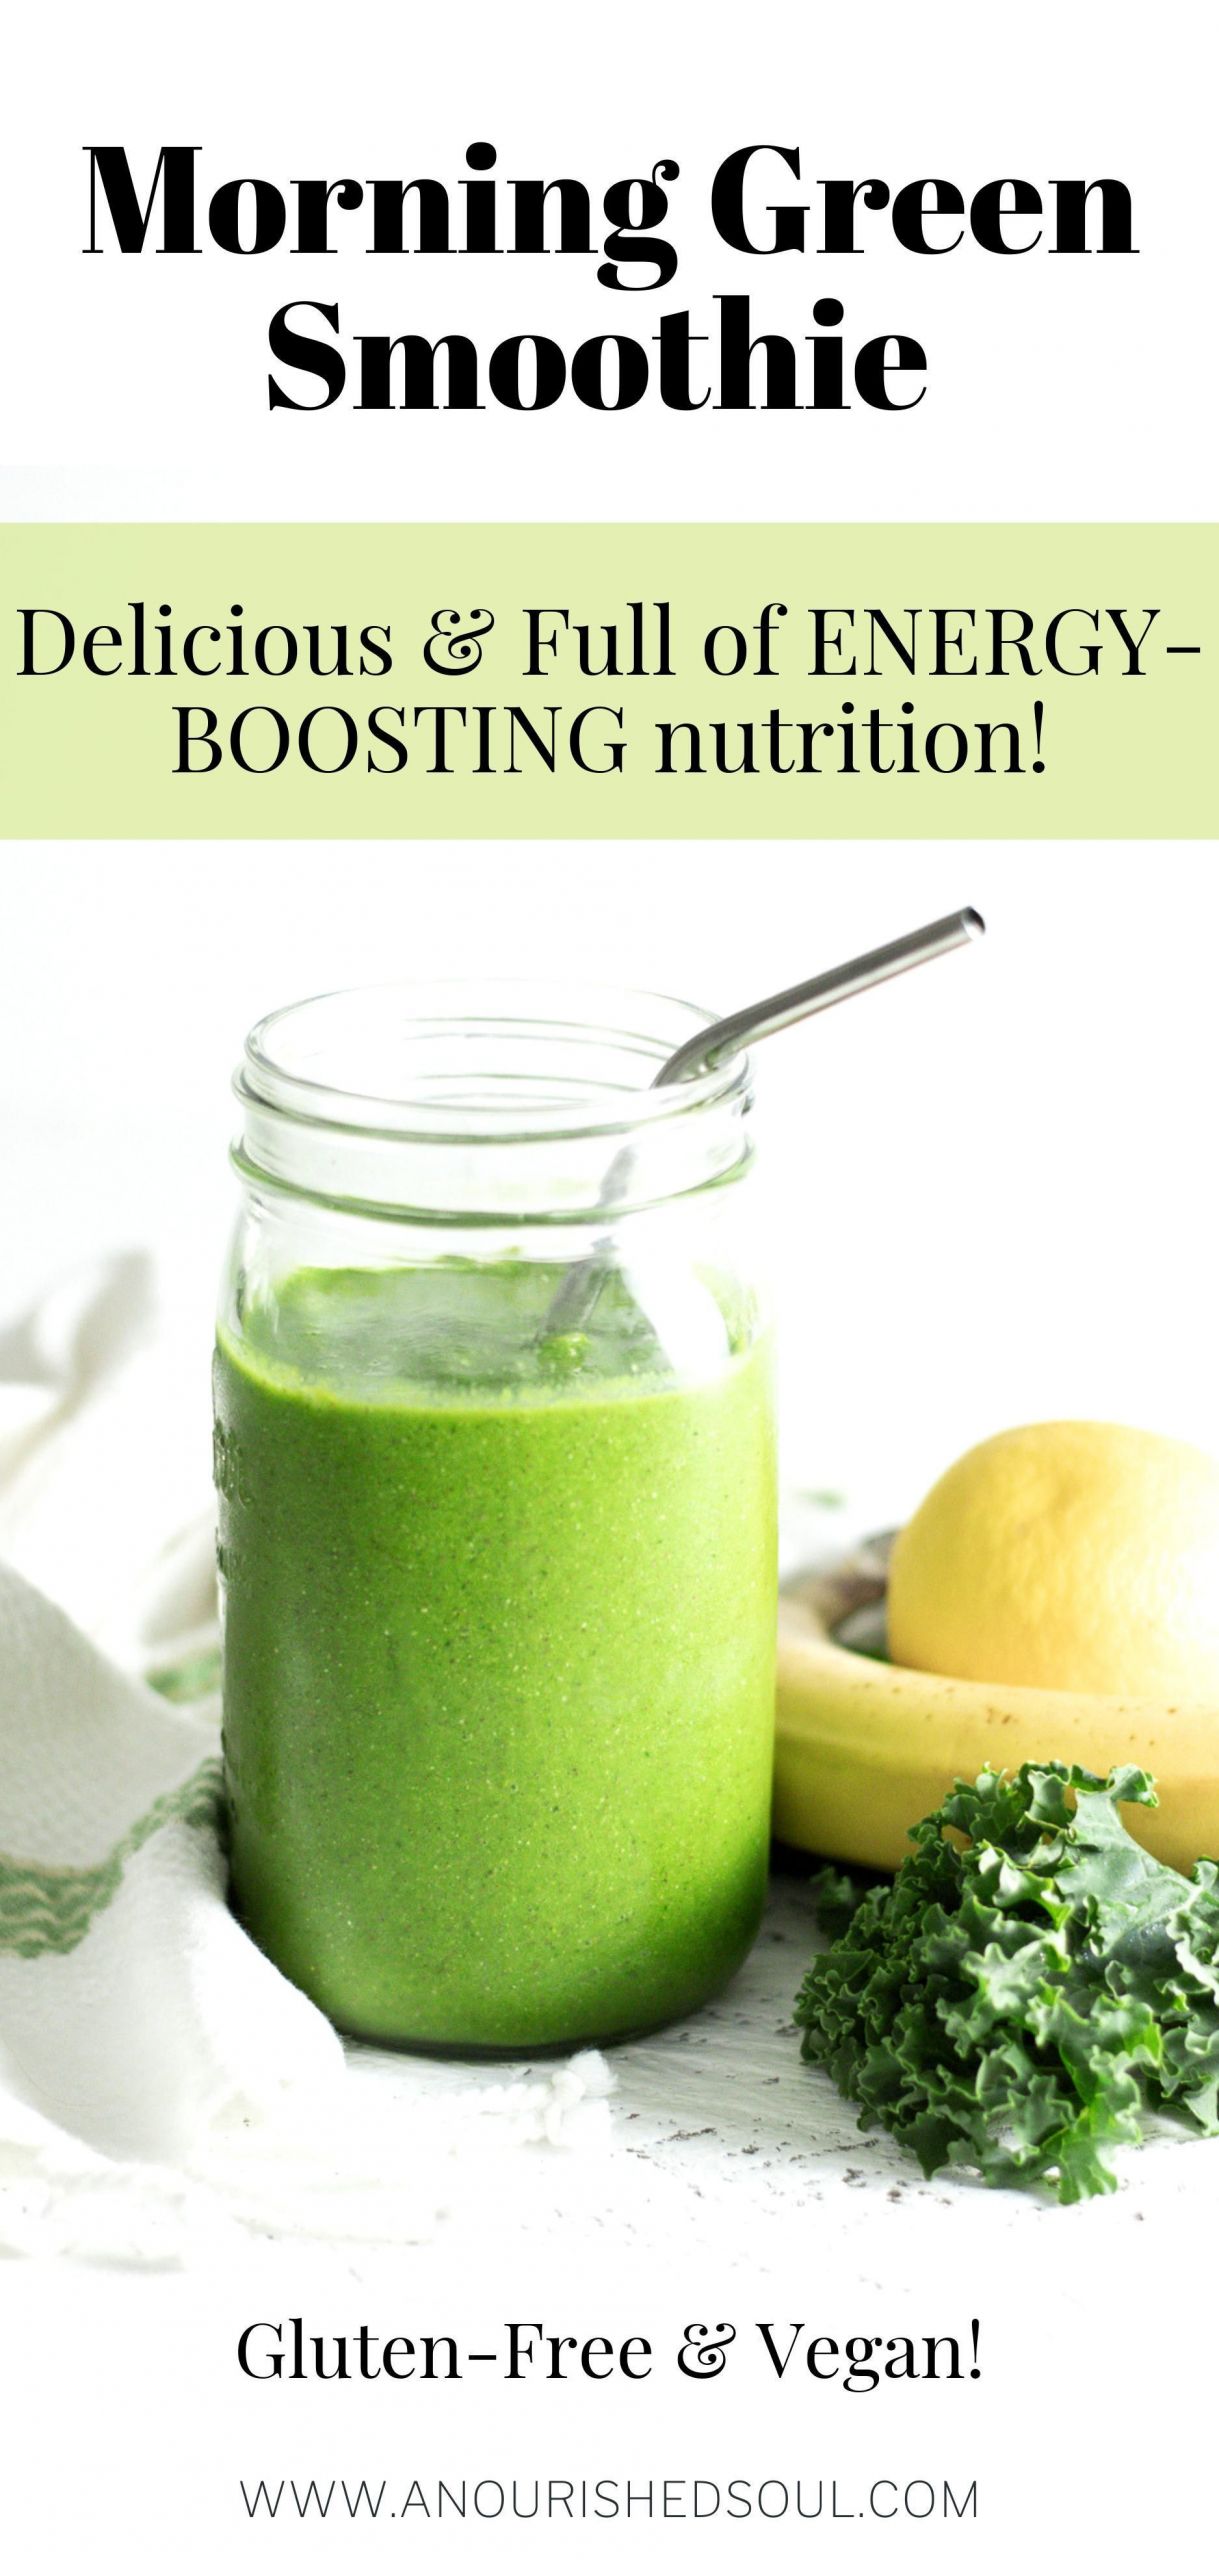 Green Breakfast Smoothie Recipes
 The Best Green Smoothie Recipe